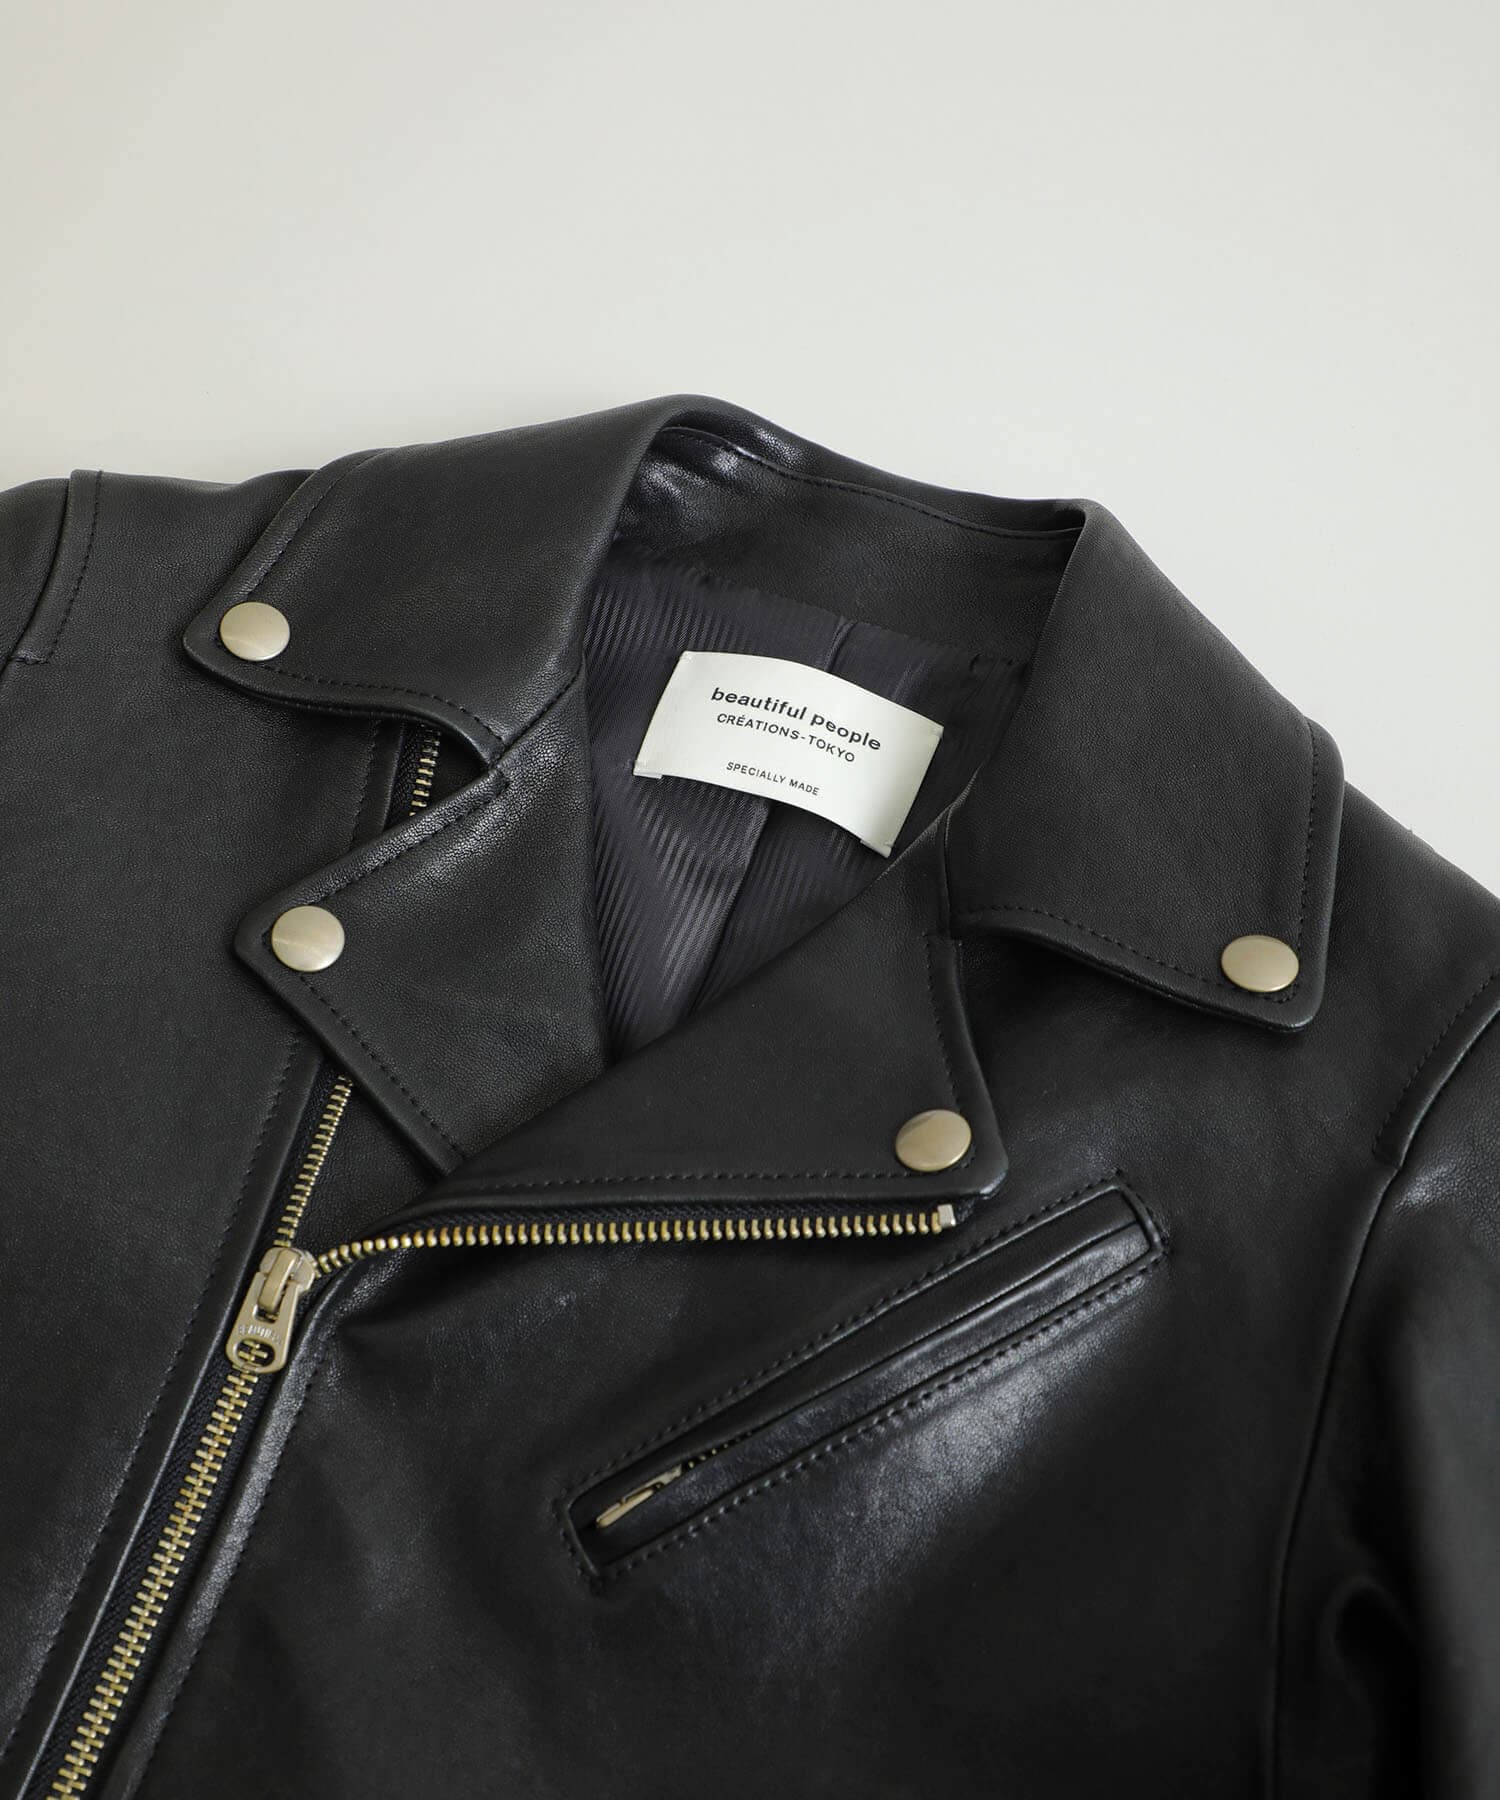 LEATHER COLLECTION 2020 A/W｜ STUDIOUS ONLINE公式通販 